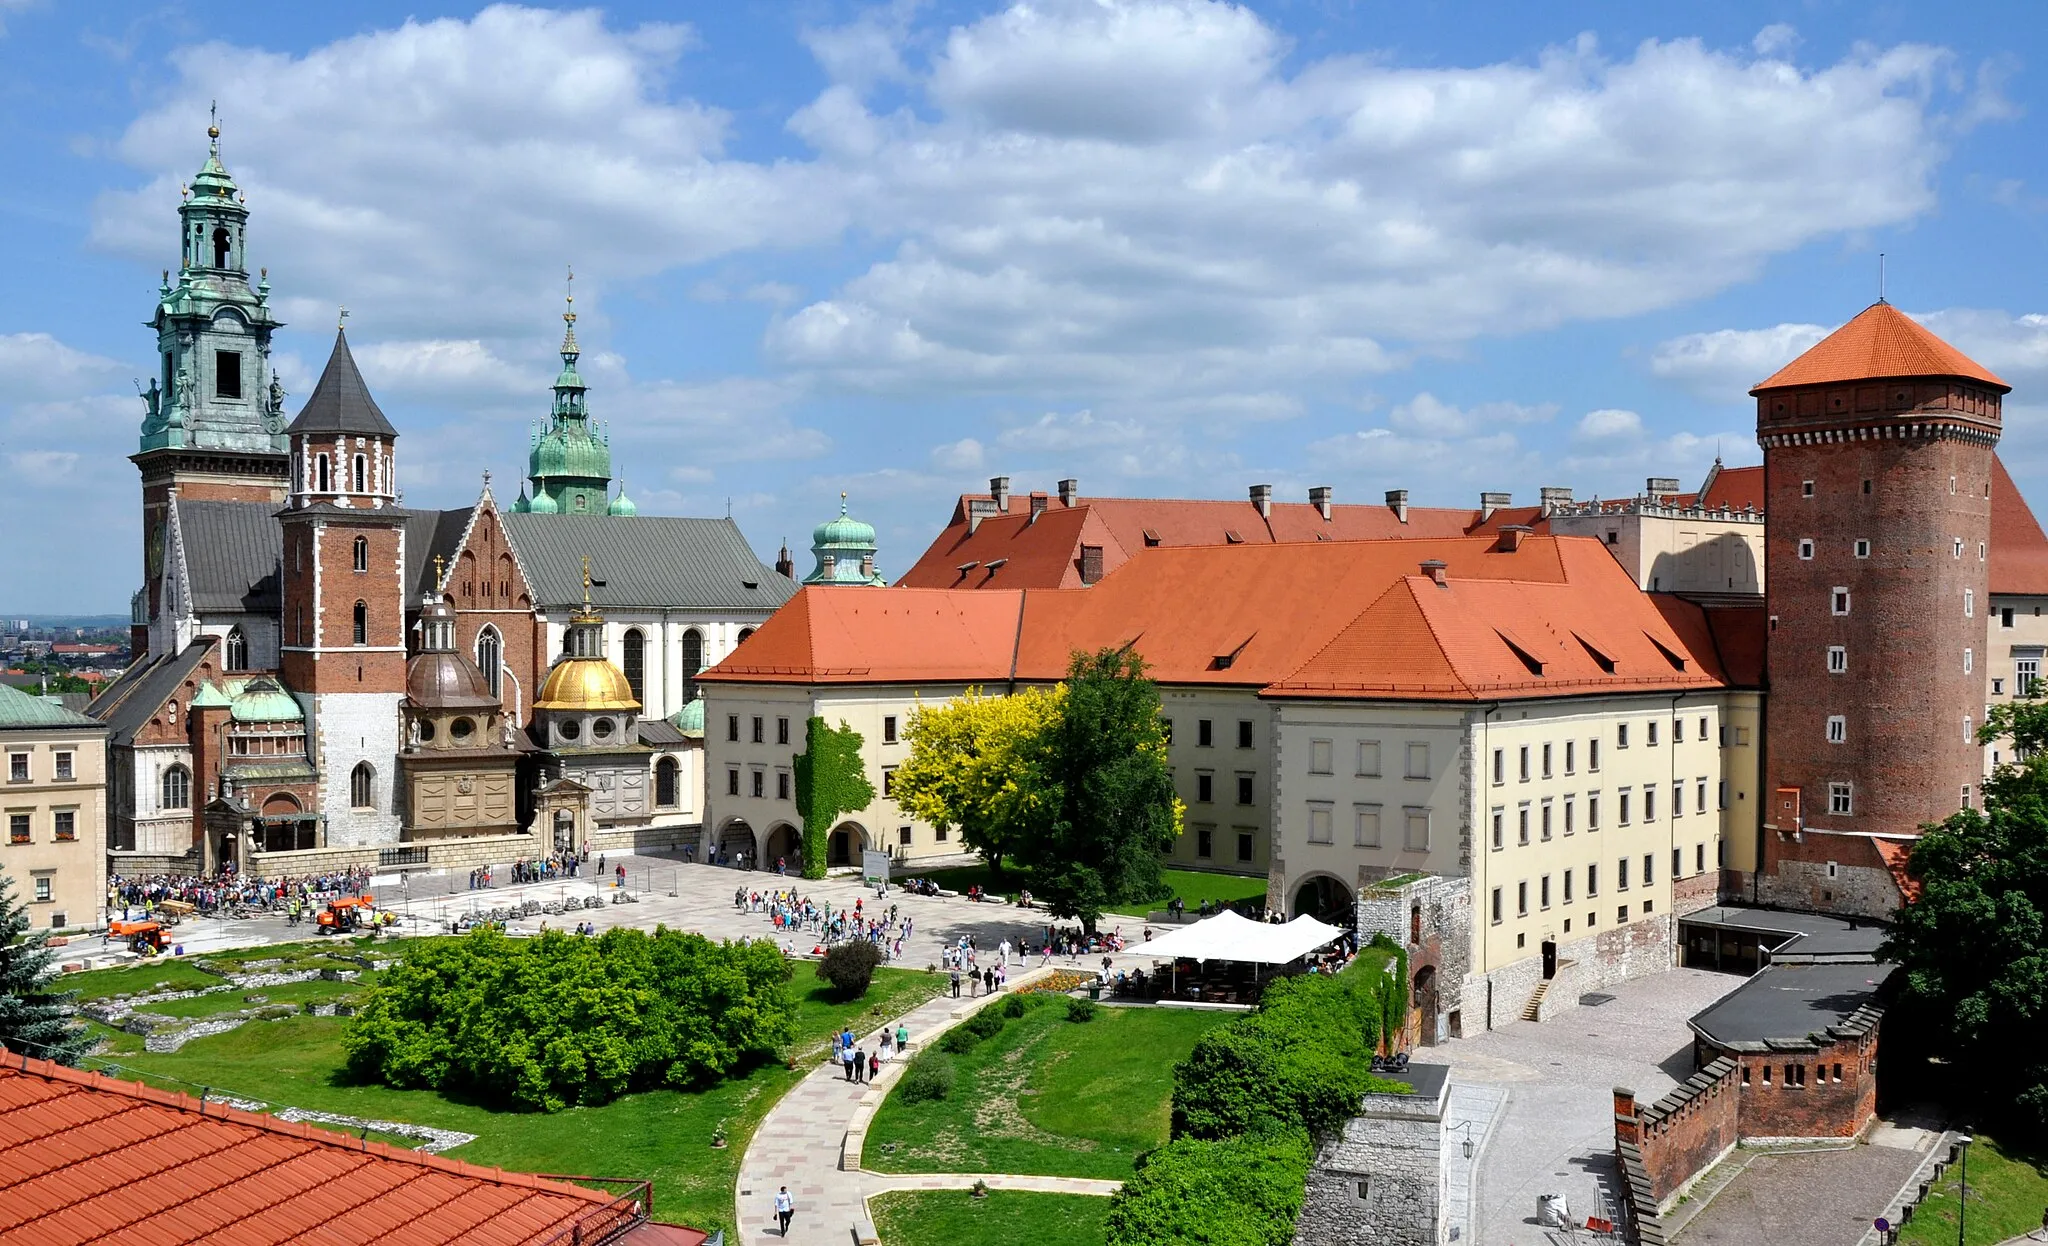 Photo showing: The Wawel Castle and Cathedral in Krakow, Poland